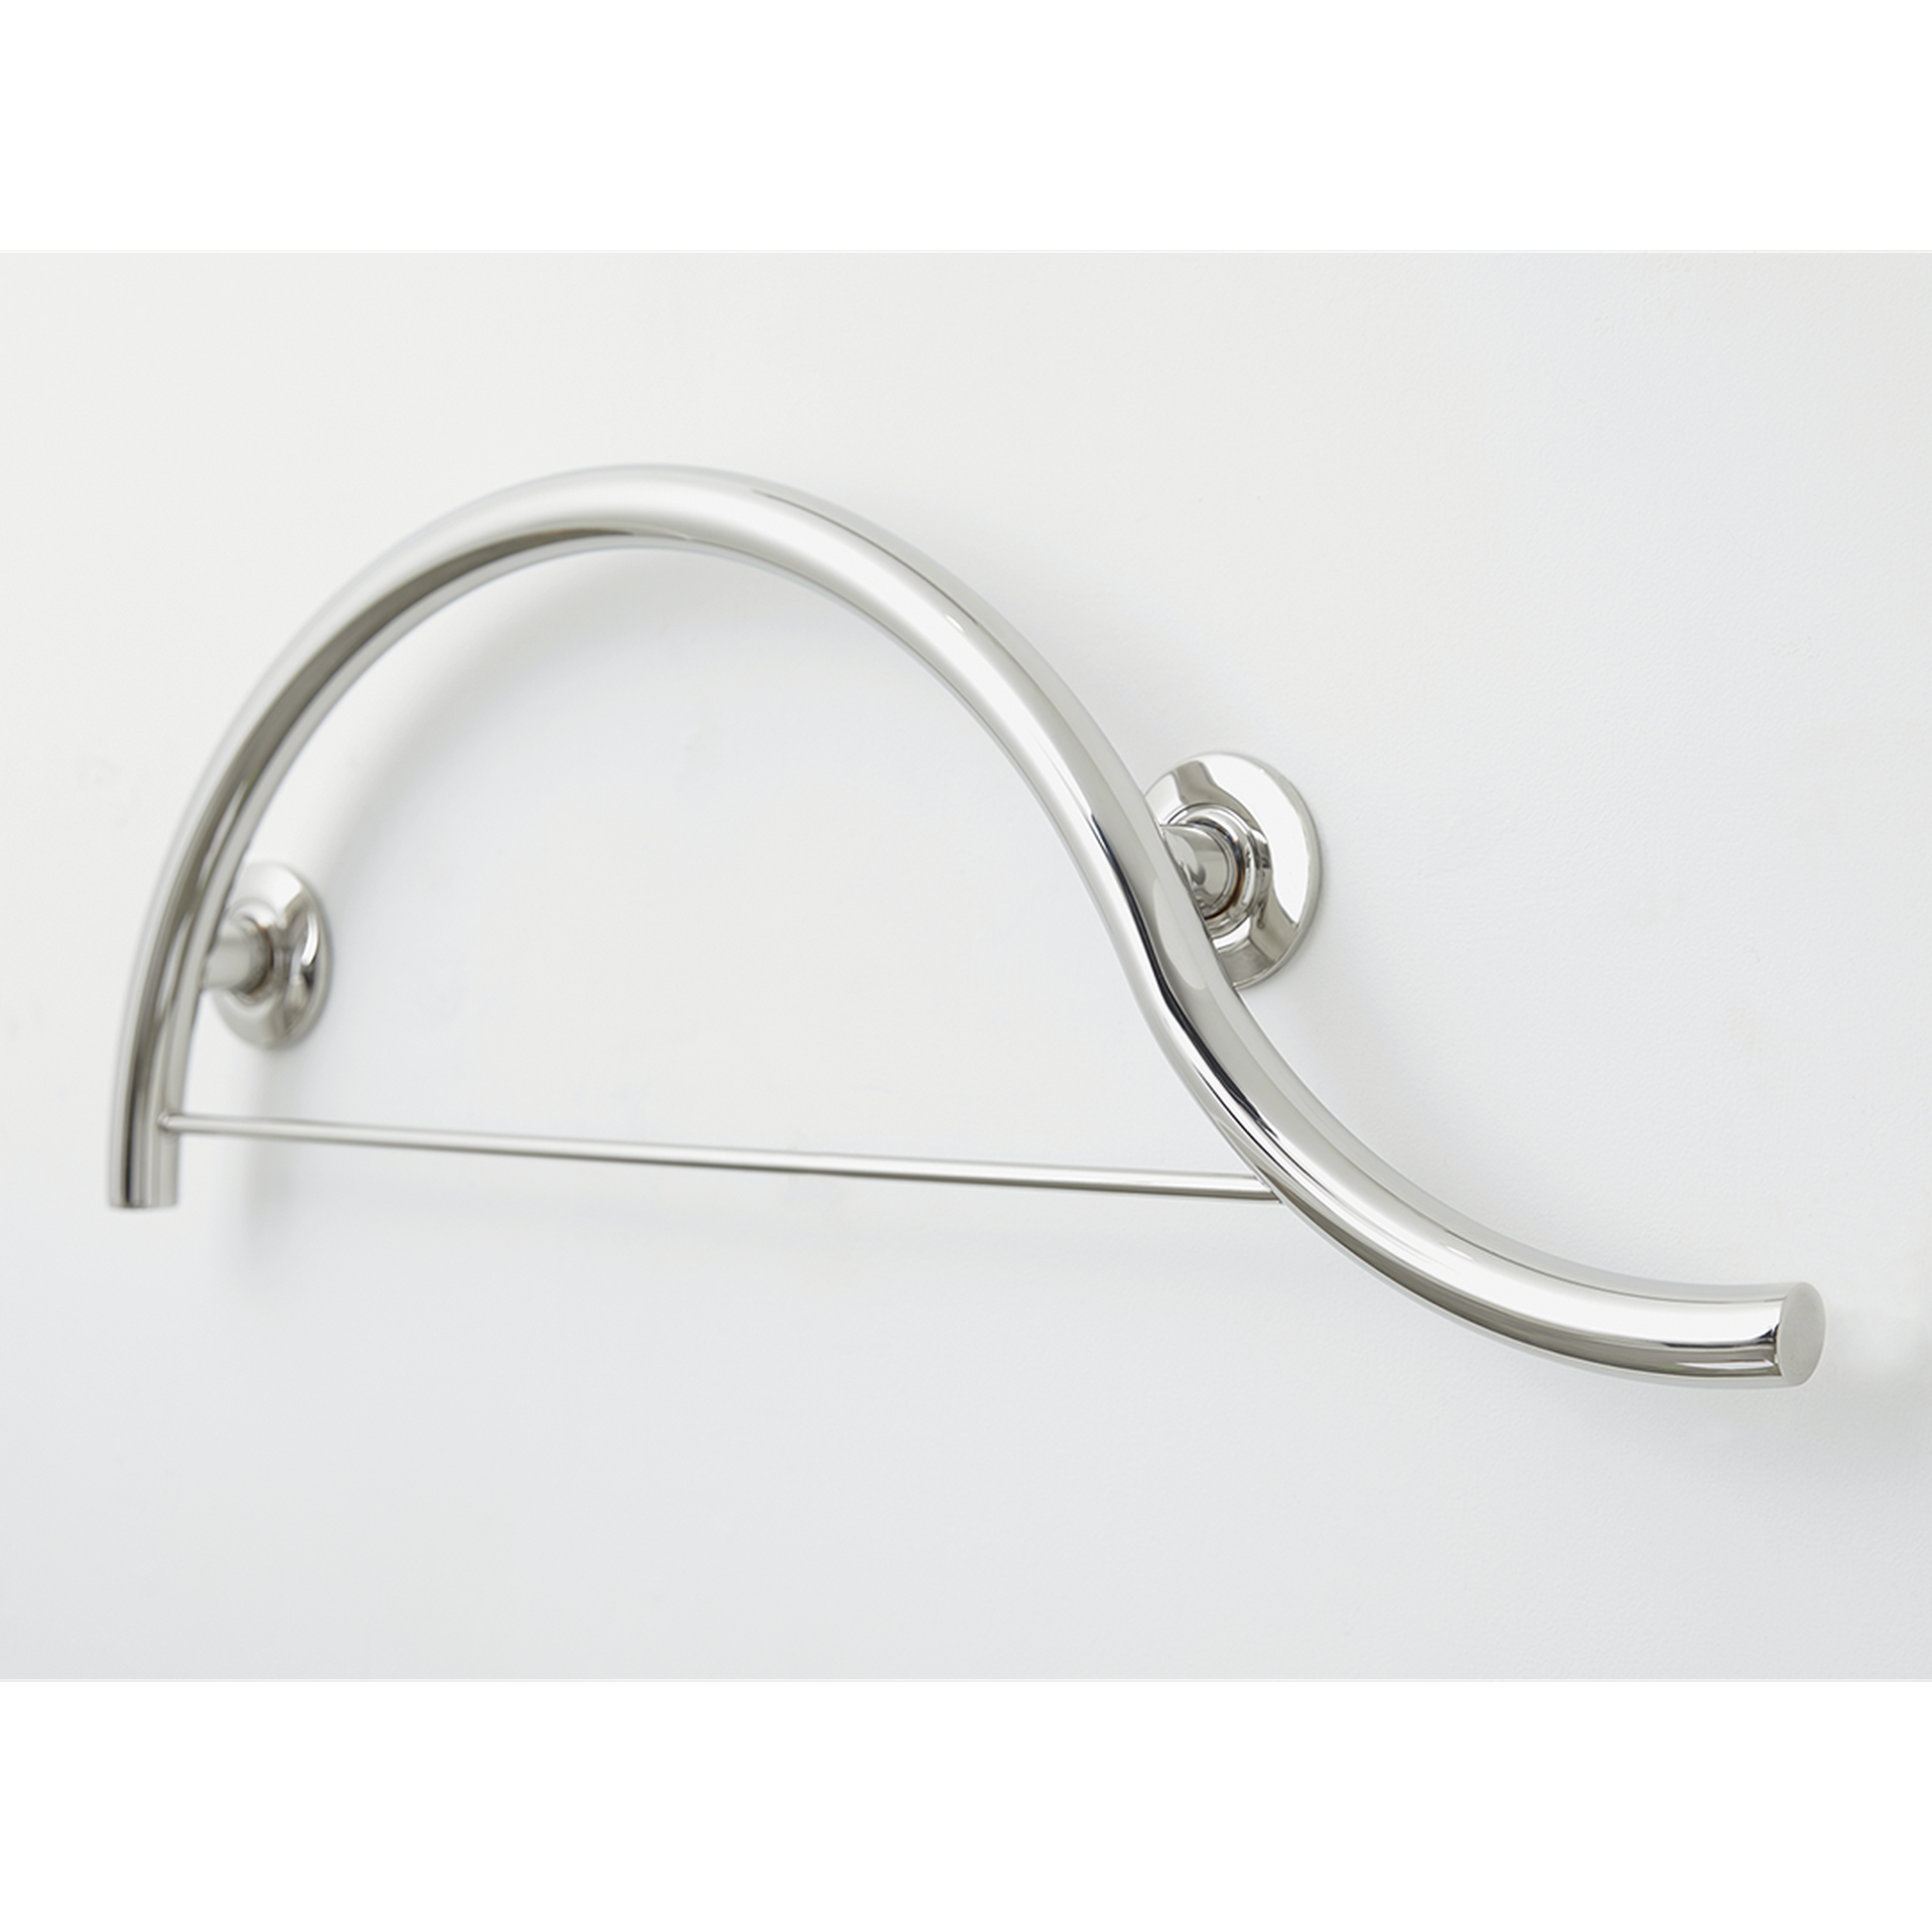 Seachrome Lifestyle & Wellness 30" Polished Stainless Steel 1.25 Diameter Concealed Flange Right-Handed Configuration Piano Curved Grab Bar With Towel Bar